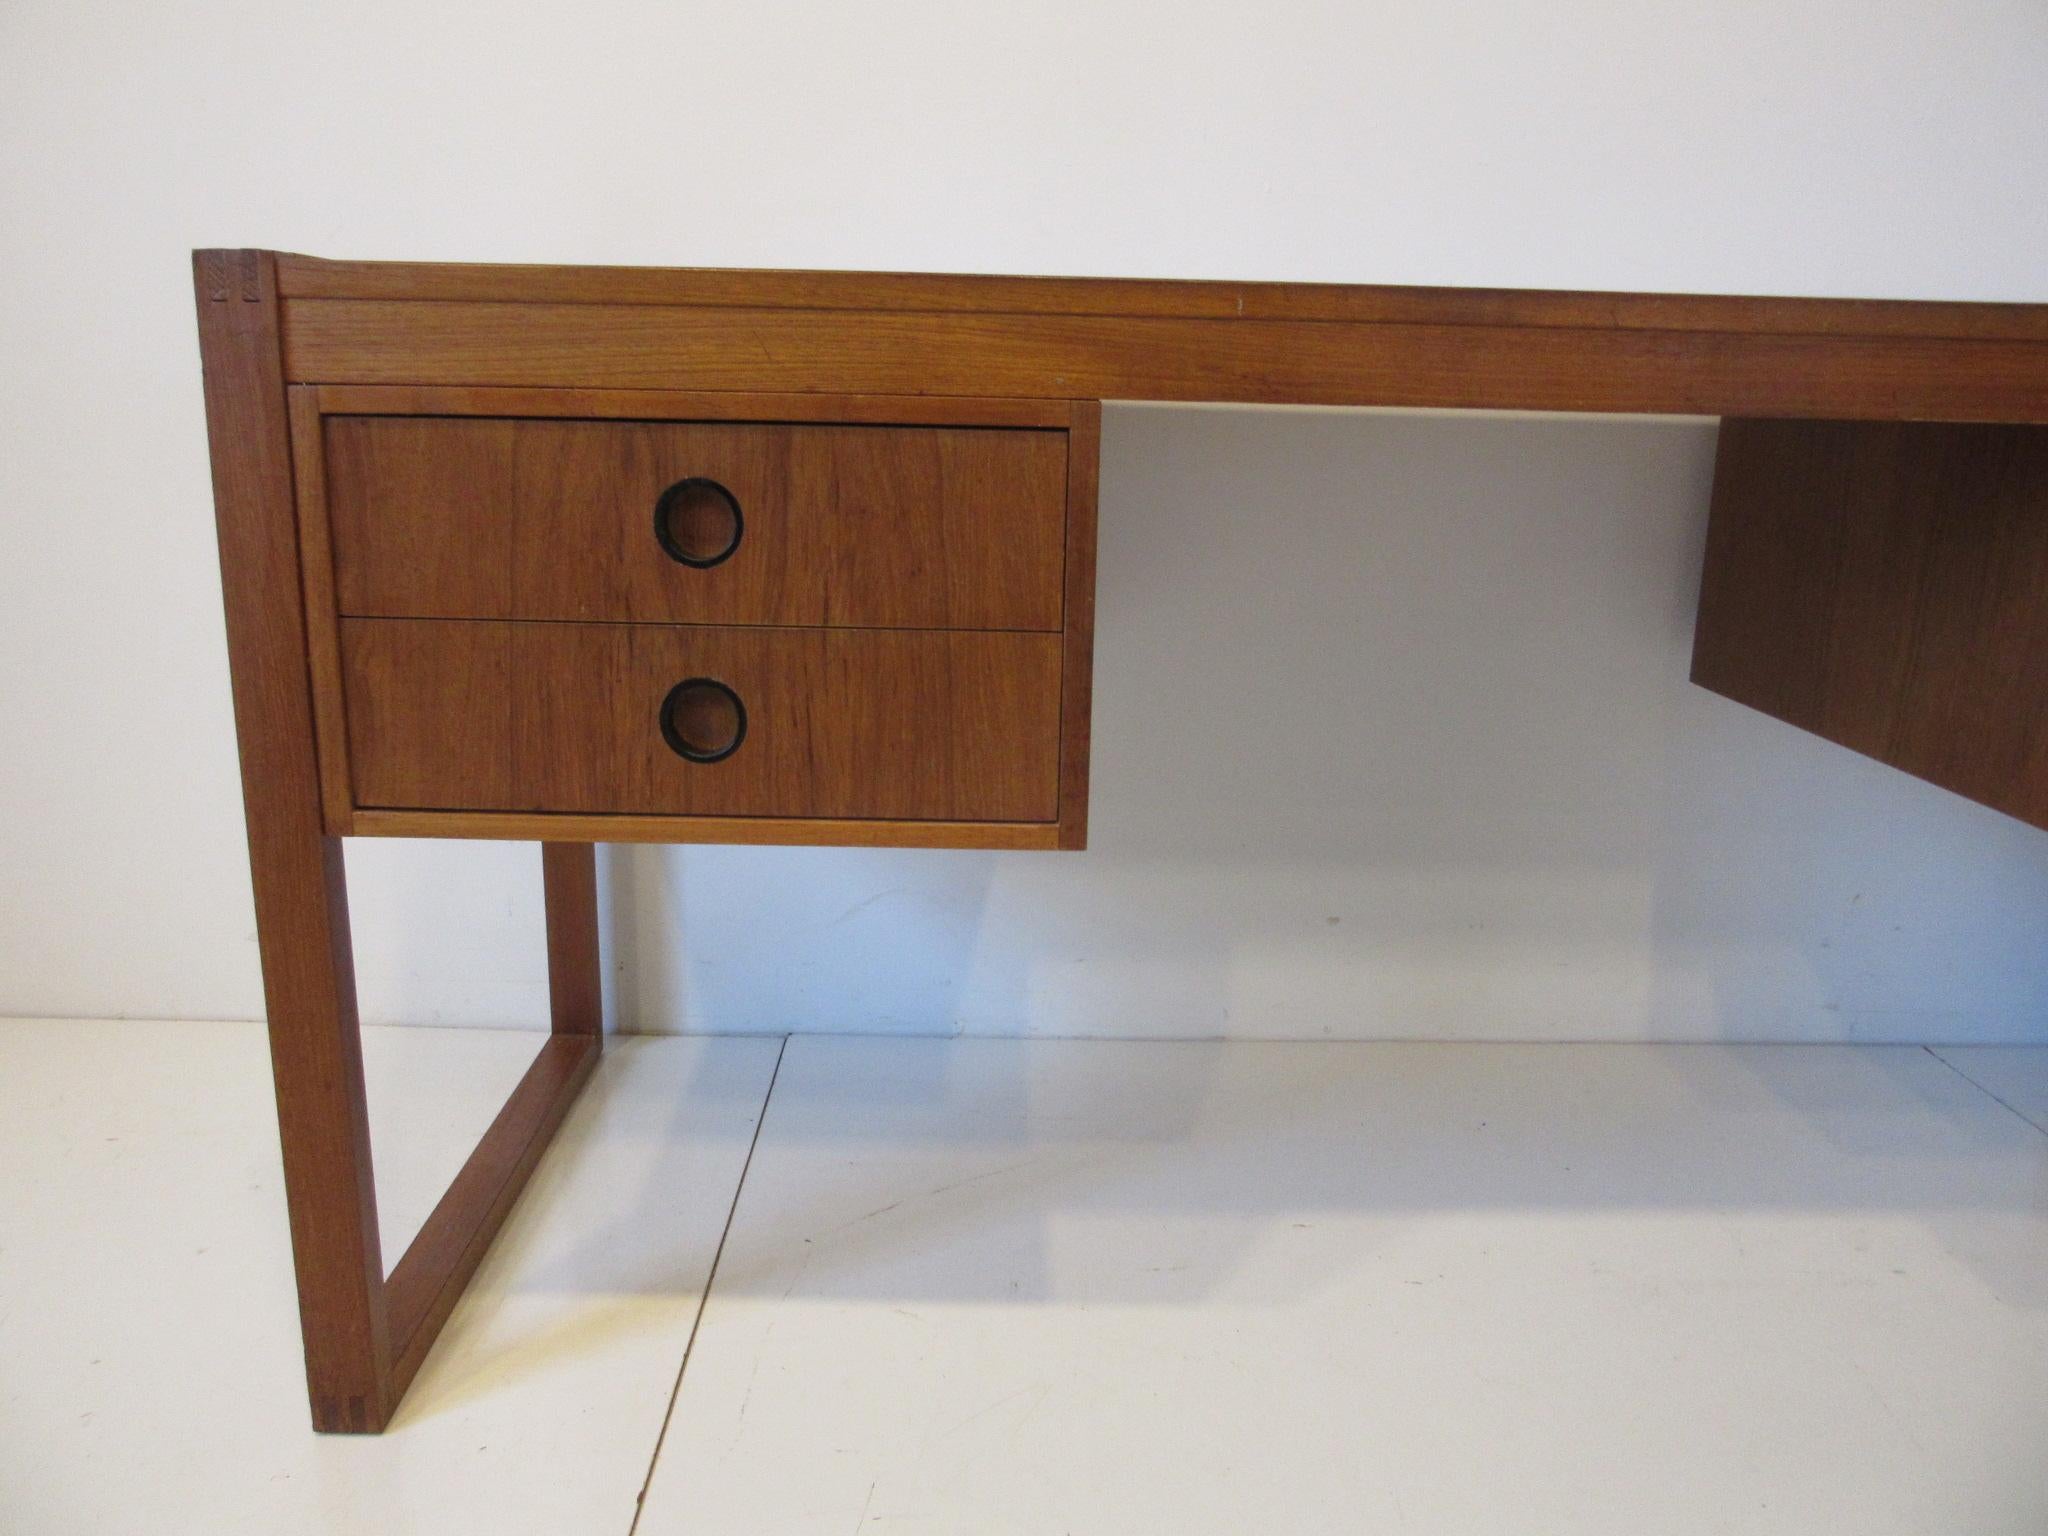 A nice sized desk for home or office made of teak, well constructed and sturdy having finger jointed legs having four drawers with round inset black pulls. Designed in the manner of Henning Jensen Torben and Valeur made in Denmark.